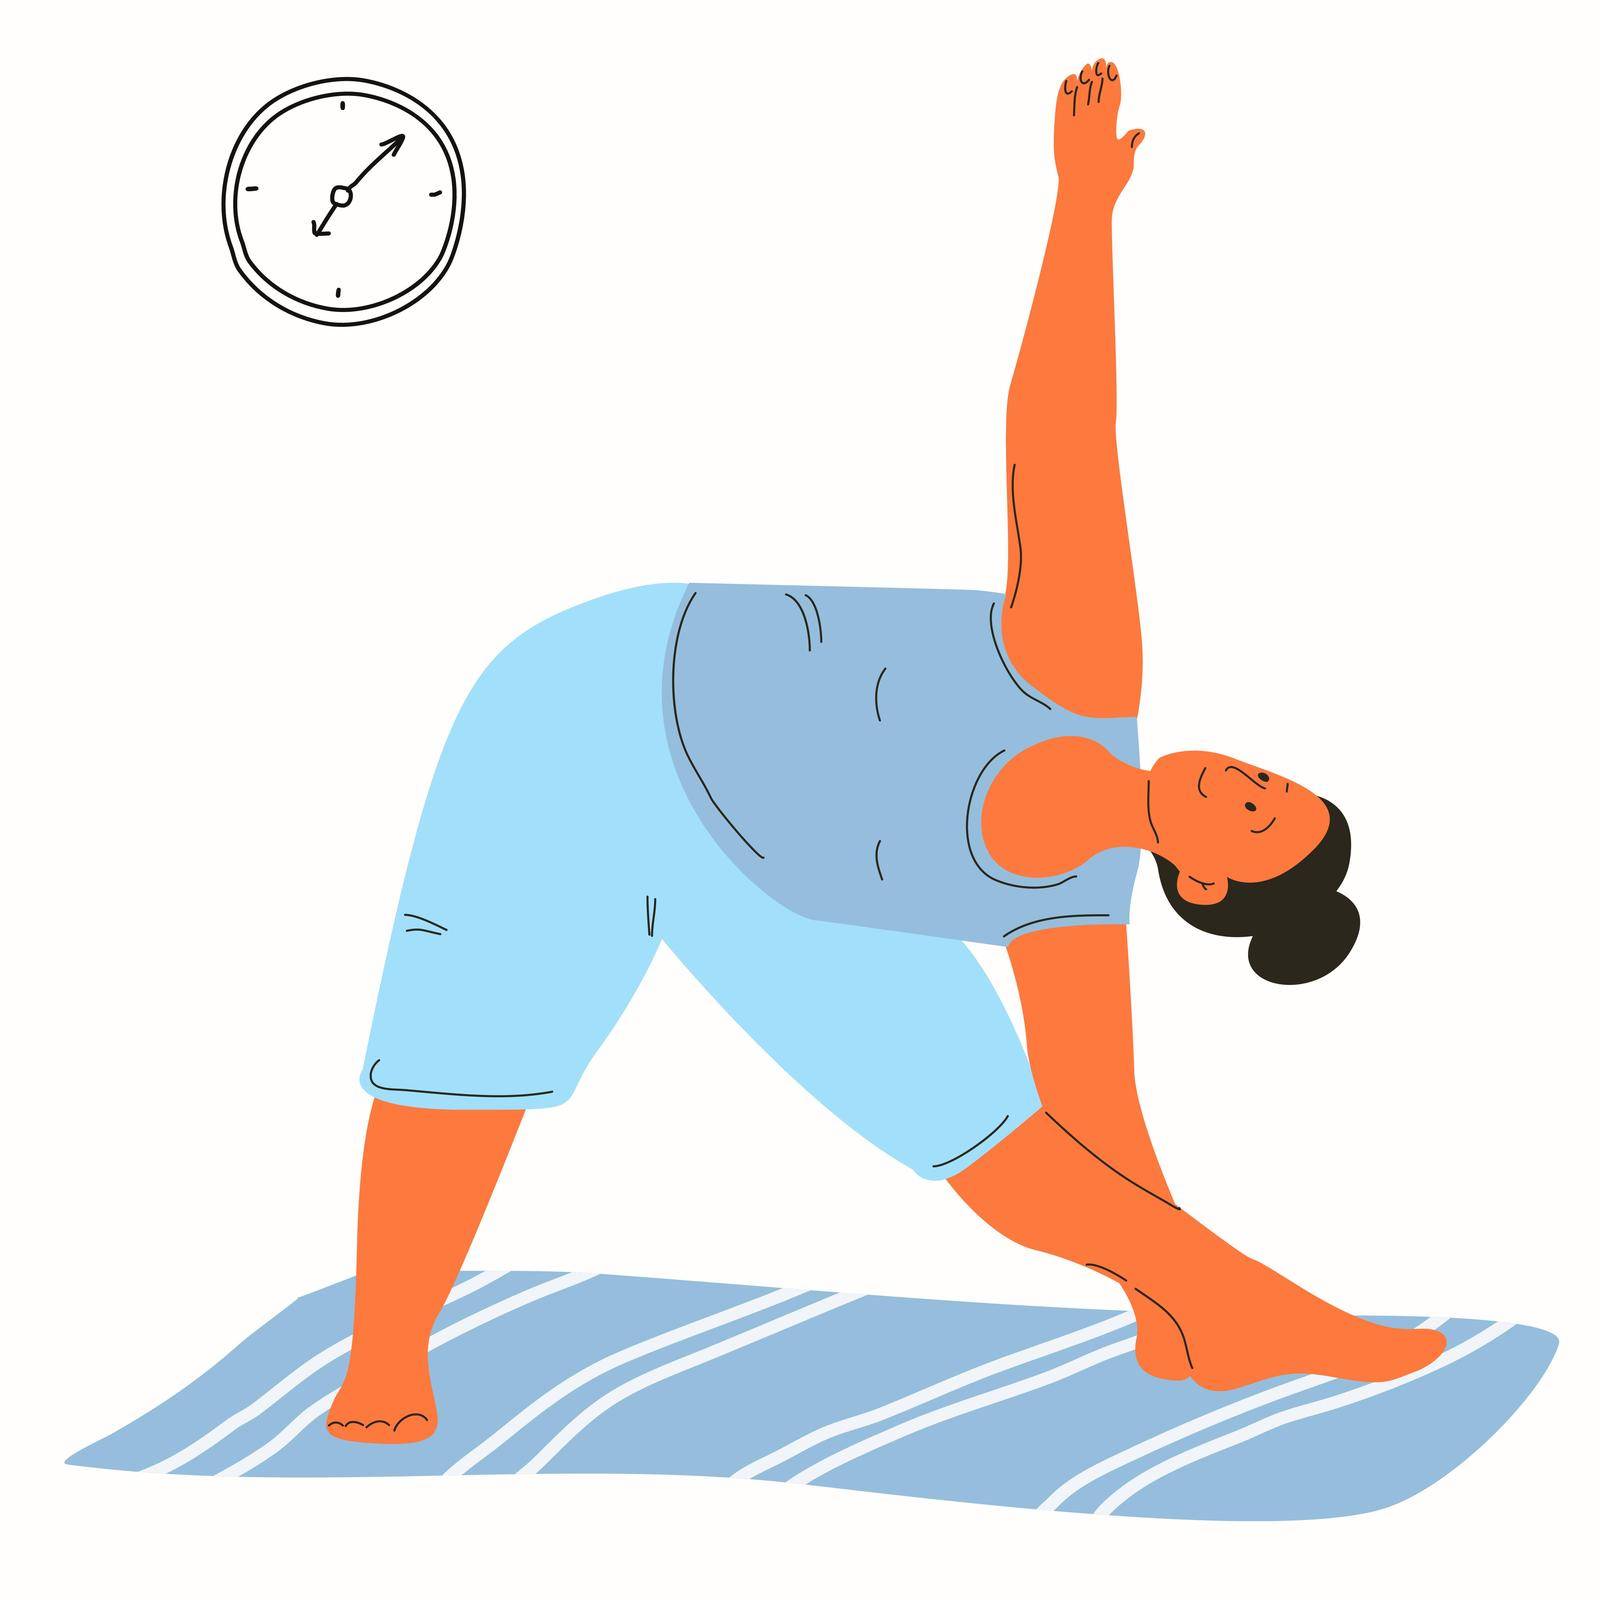 Yoga class at home. Sports and health. Doodle style illustration